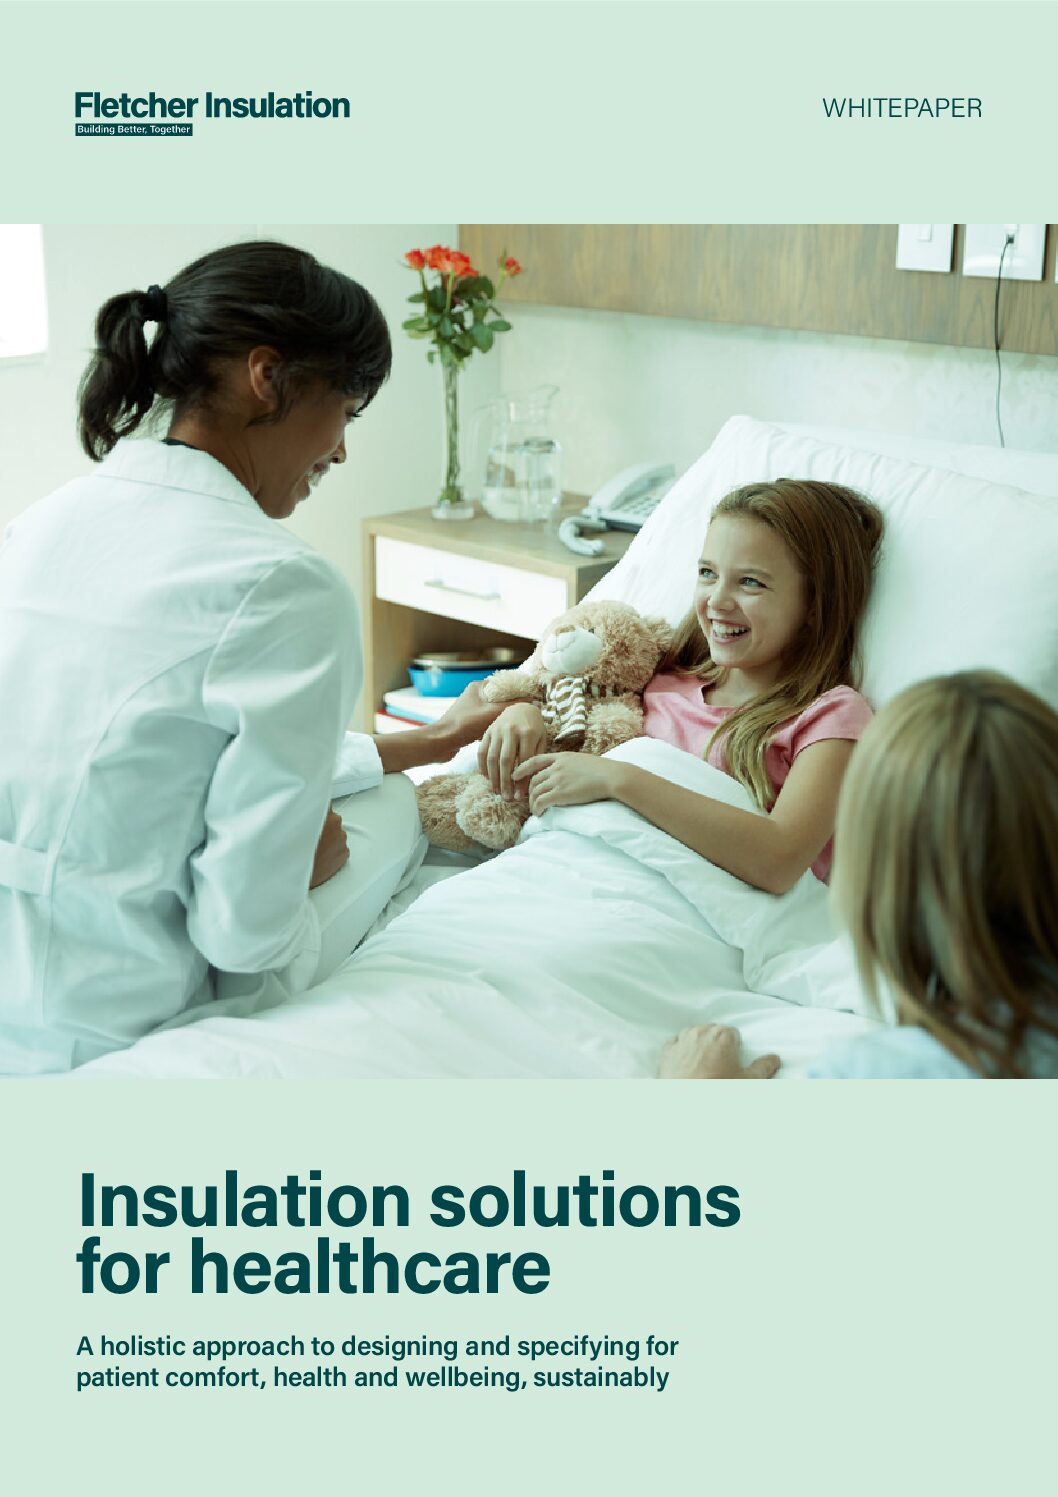 Whitepaper – Insulation Solutions for Healthcare